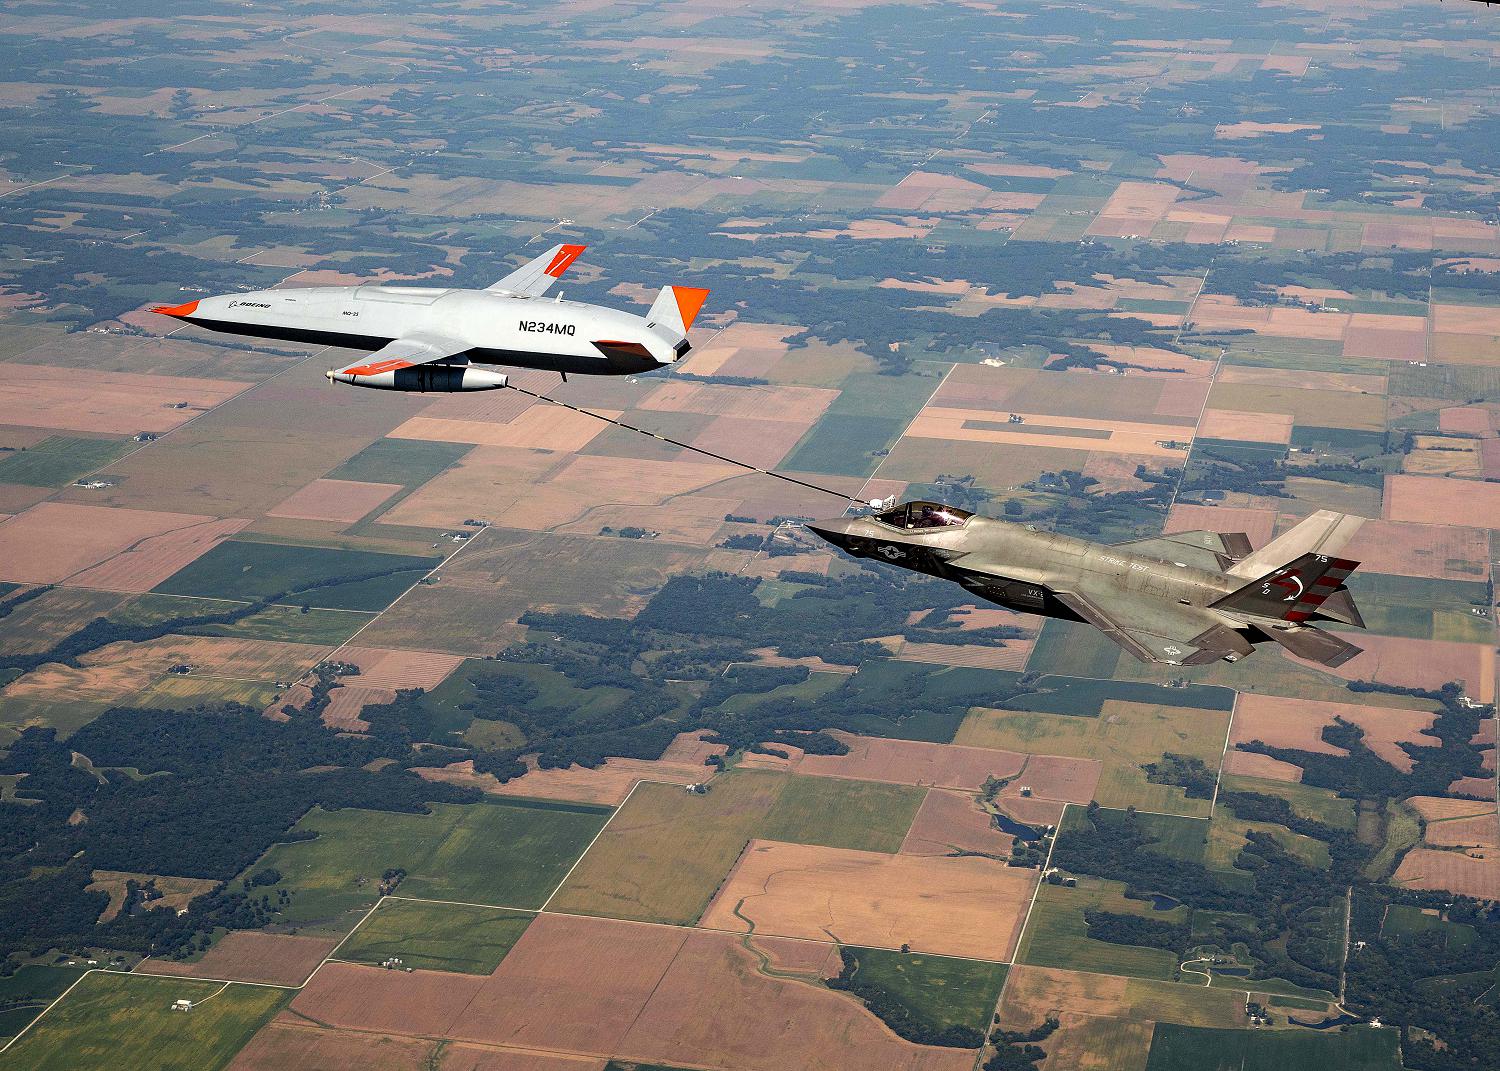 MASCOUTAH, Ill. (Sept. 13, 2021) An unmanned Boeing MQ-25 T1 Stingray test aircraft, left, refuels a manned F-35 Lightning II, Sept. 13, 2021, near MidAmerica Airport in Mascoutah, Illinois. This successful flight demonstrated that the MQ-25 Stingray can fulfill its tanker mission using the Navy's standard probe-and-drogue aerial refueling method. Testing with the unmanned MQ-25 T1 Stingray will continue over the next several months. The MQ-25A Stingray will be the world's first operational carrier-based unmanned aircraft and provide critical aerial refueling and intelligence, surveillance and reconnaissance capabilities that greatly expand the global reach, operational flexibility and lethality of the carrier air wing and carrier strike group. (U.S. Navy photo courtesy of Boeing)